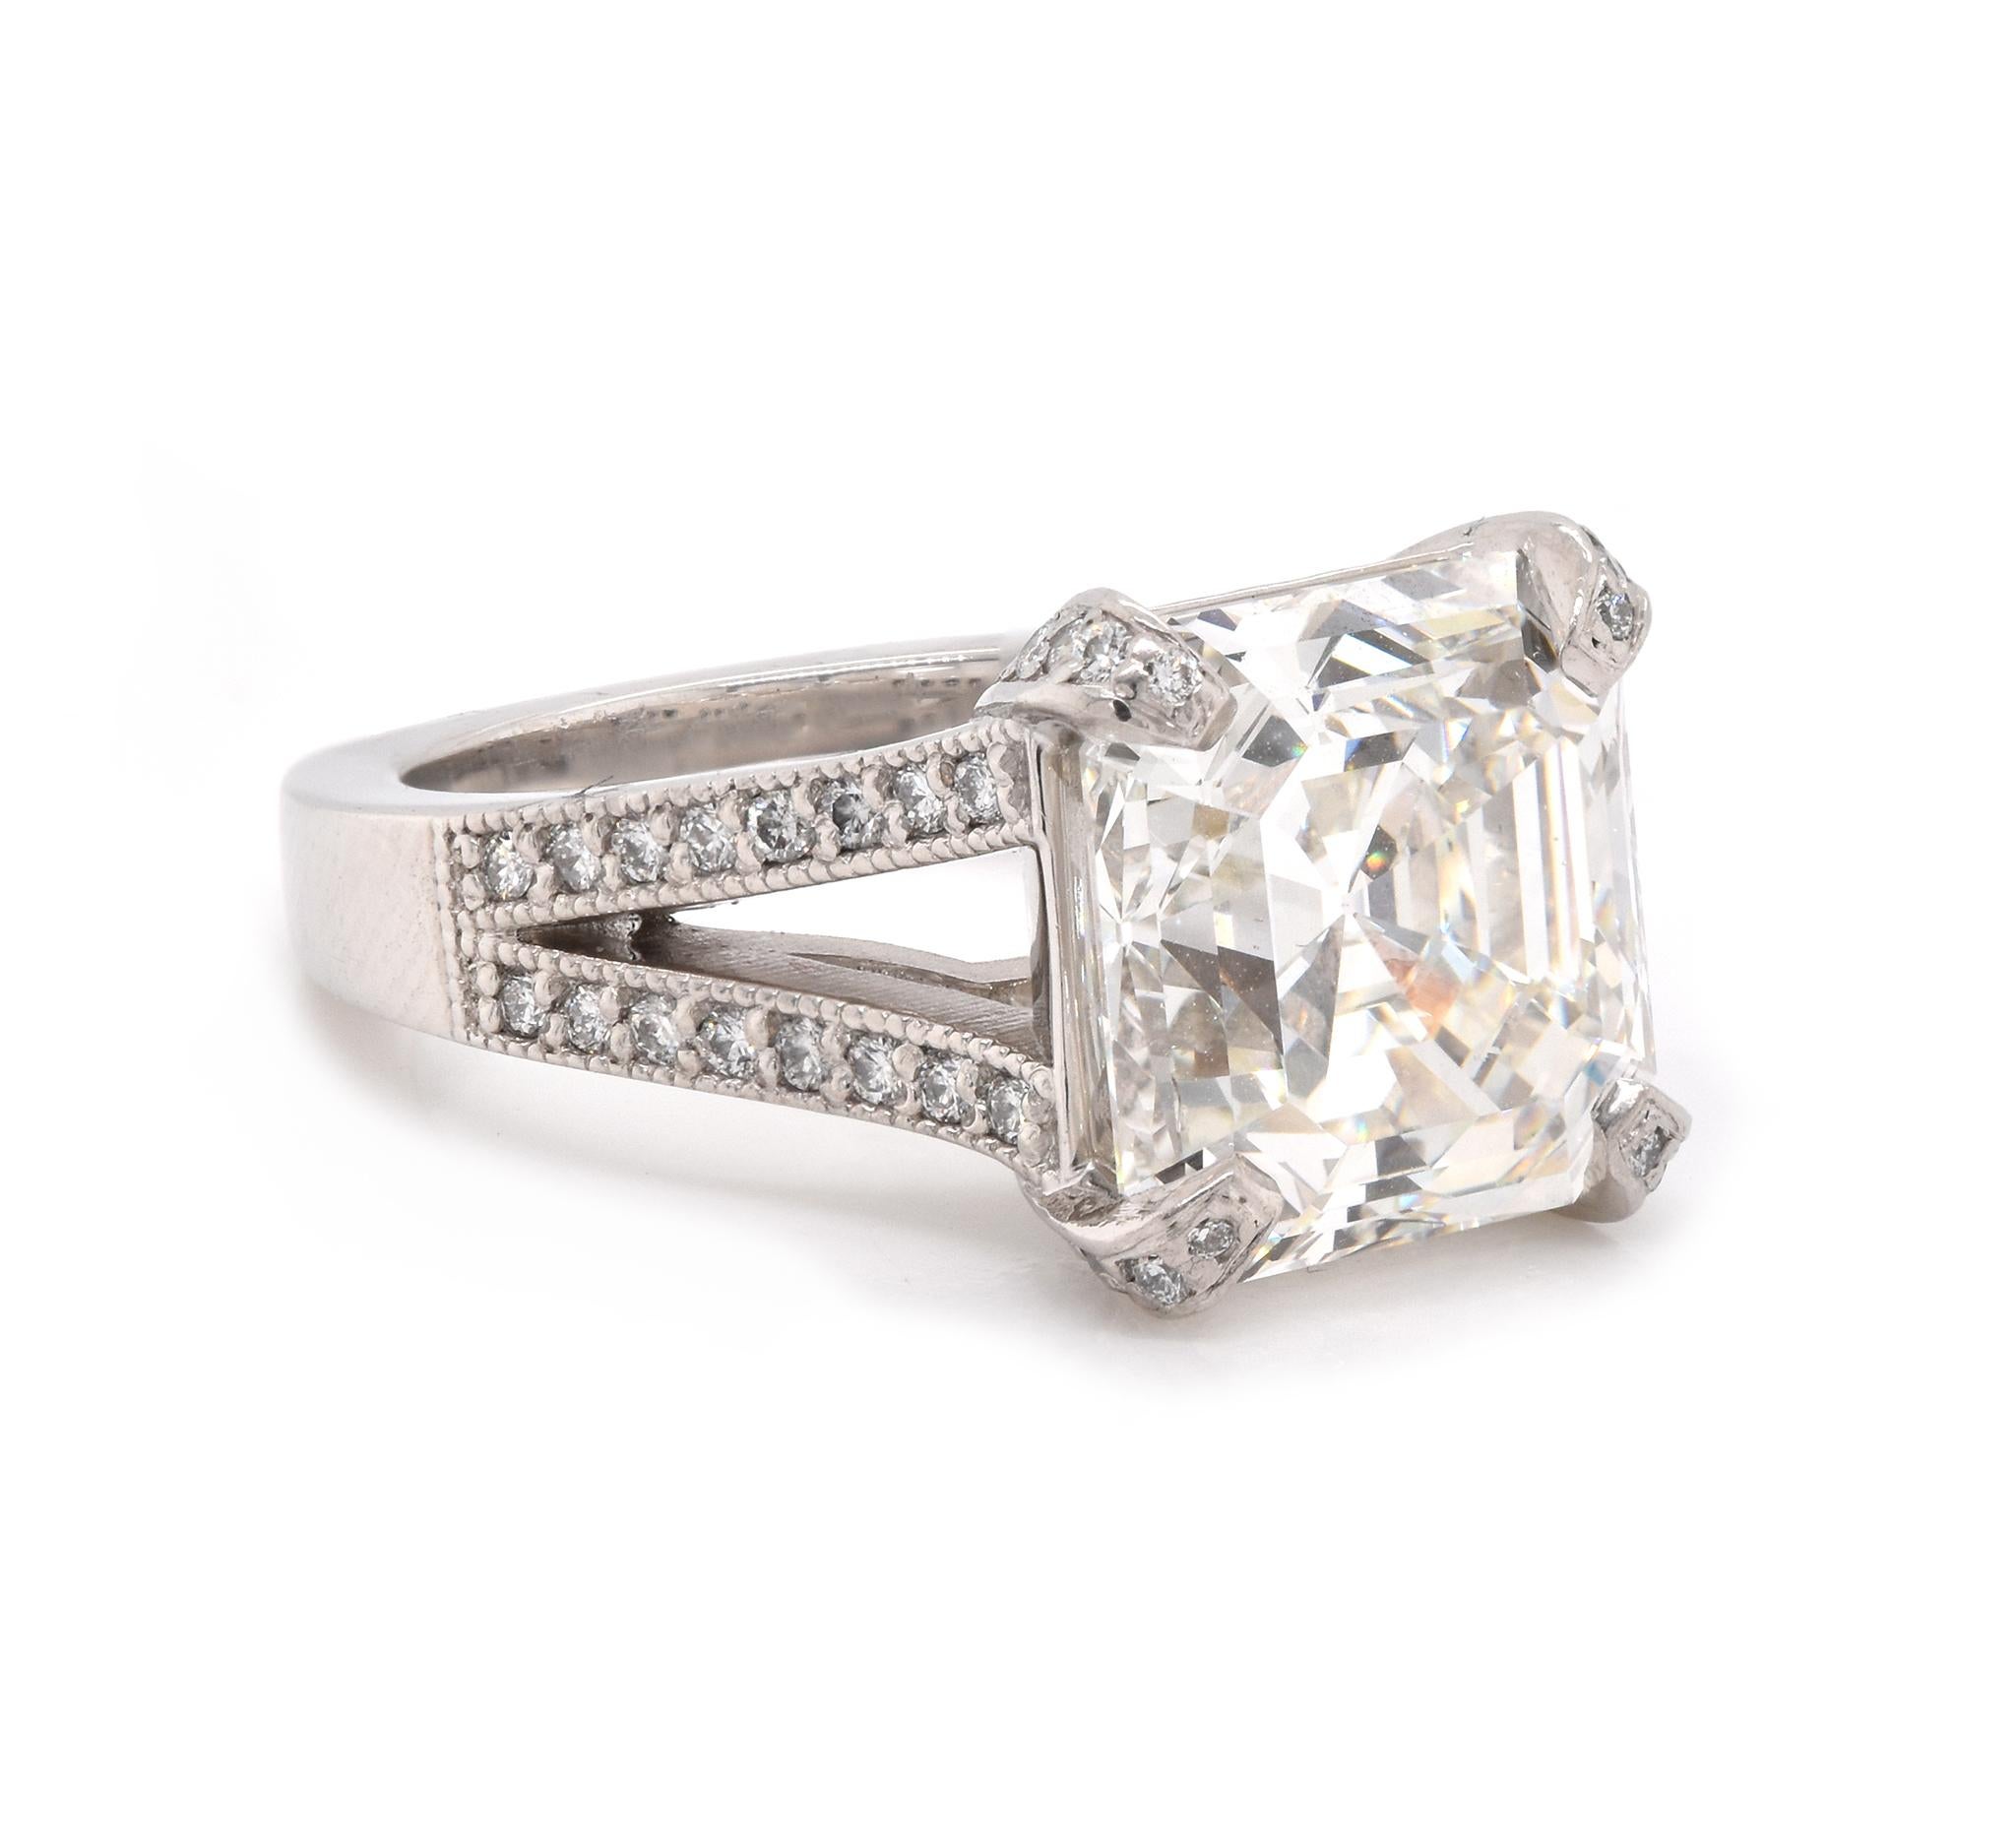 Designer: custom
Material: Platinum
Center Diamond: 1 square emerald cut = 7.52ct
Color: J
Clarity: VS2
GIA: 215623507
Diamond: 32 round cut = .32cttw
Color: H
Clarity: VS1
Ring Size: 6.5 (please allow up to 2 additional business days for sizing